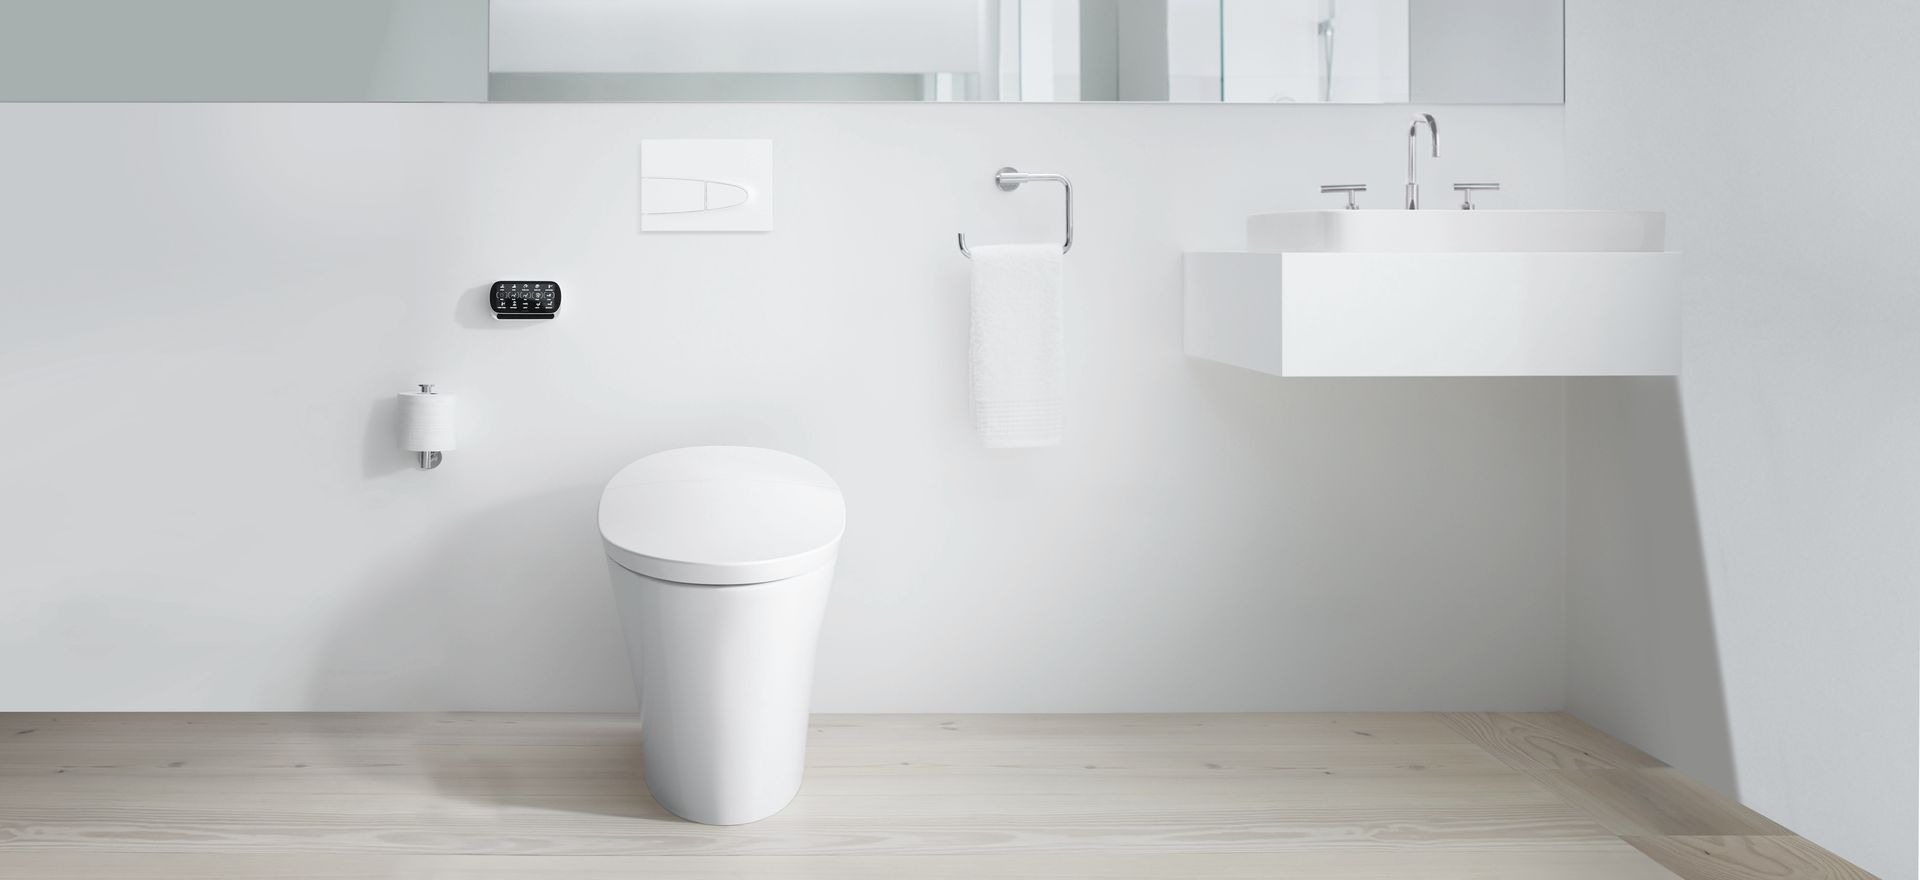 The pros and cons of different types of toilets